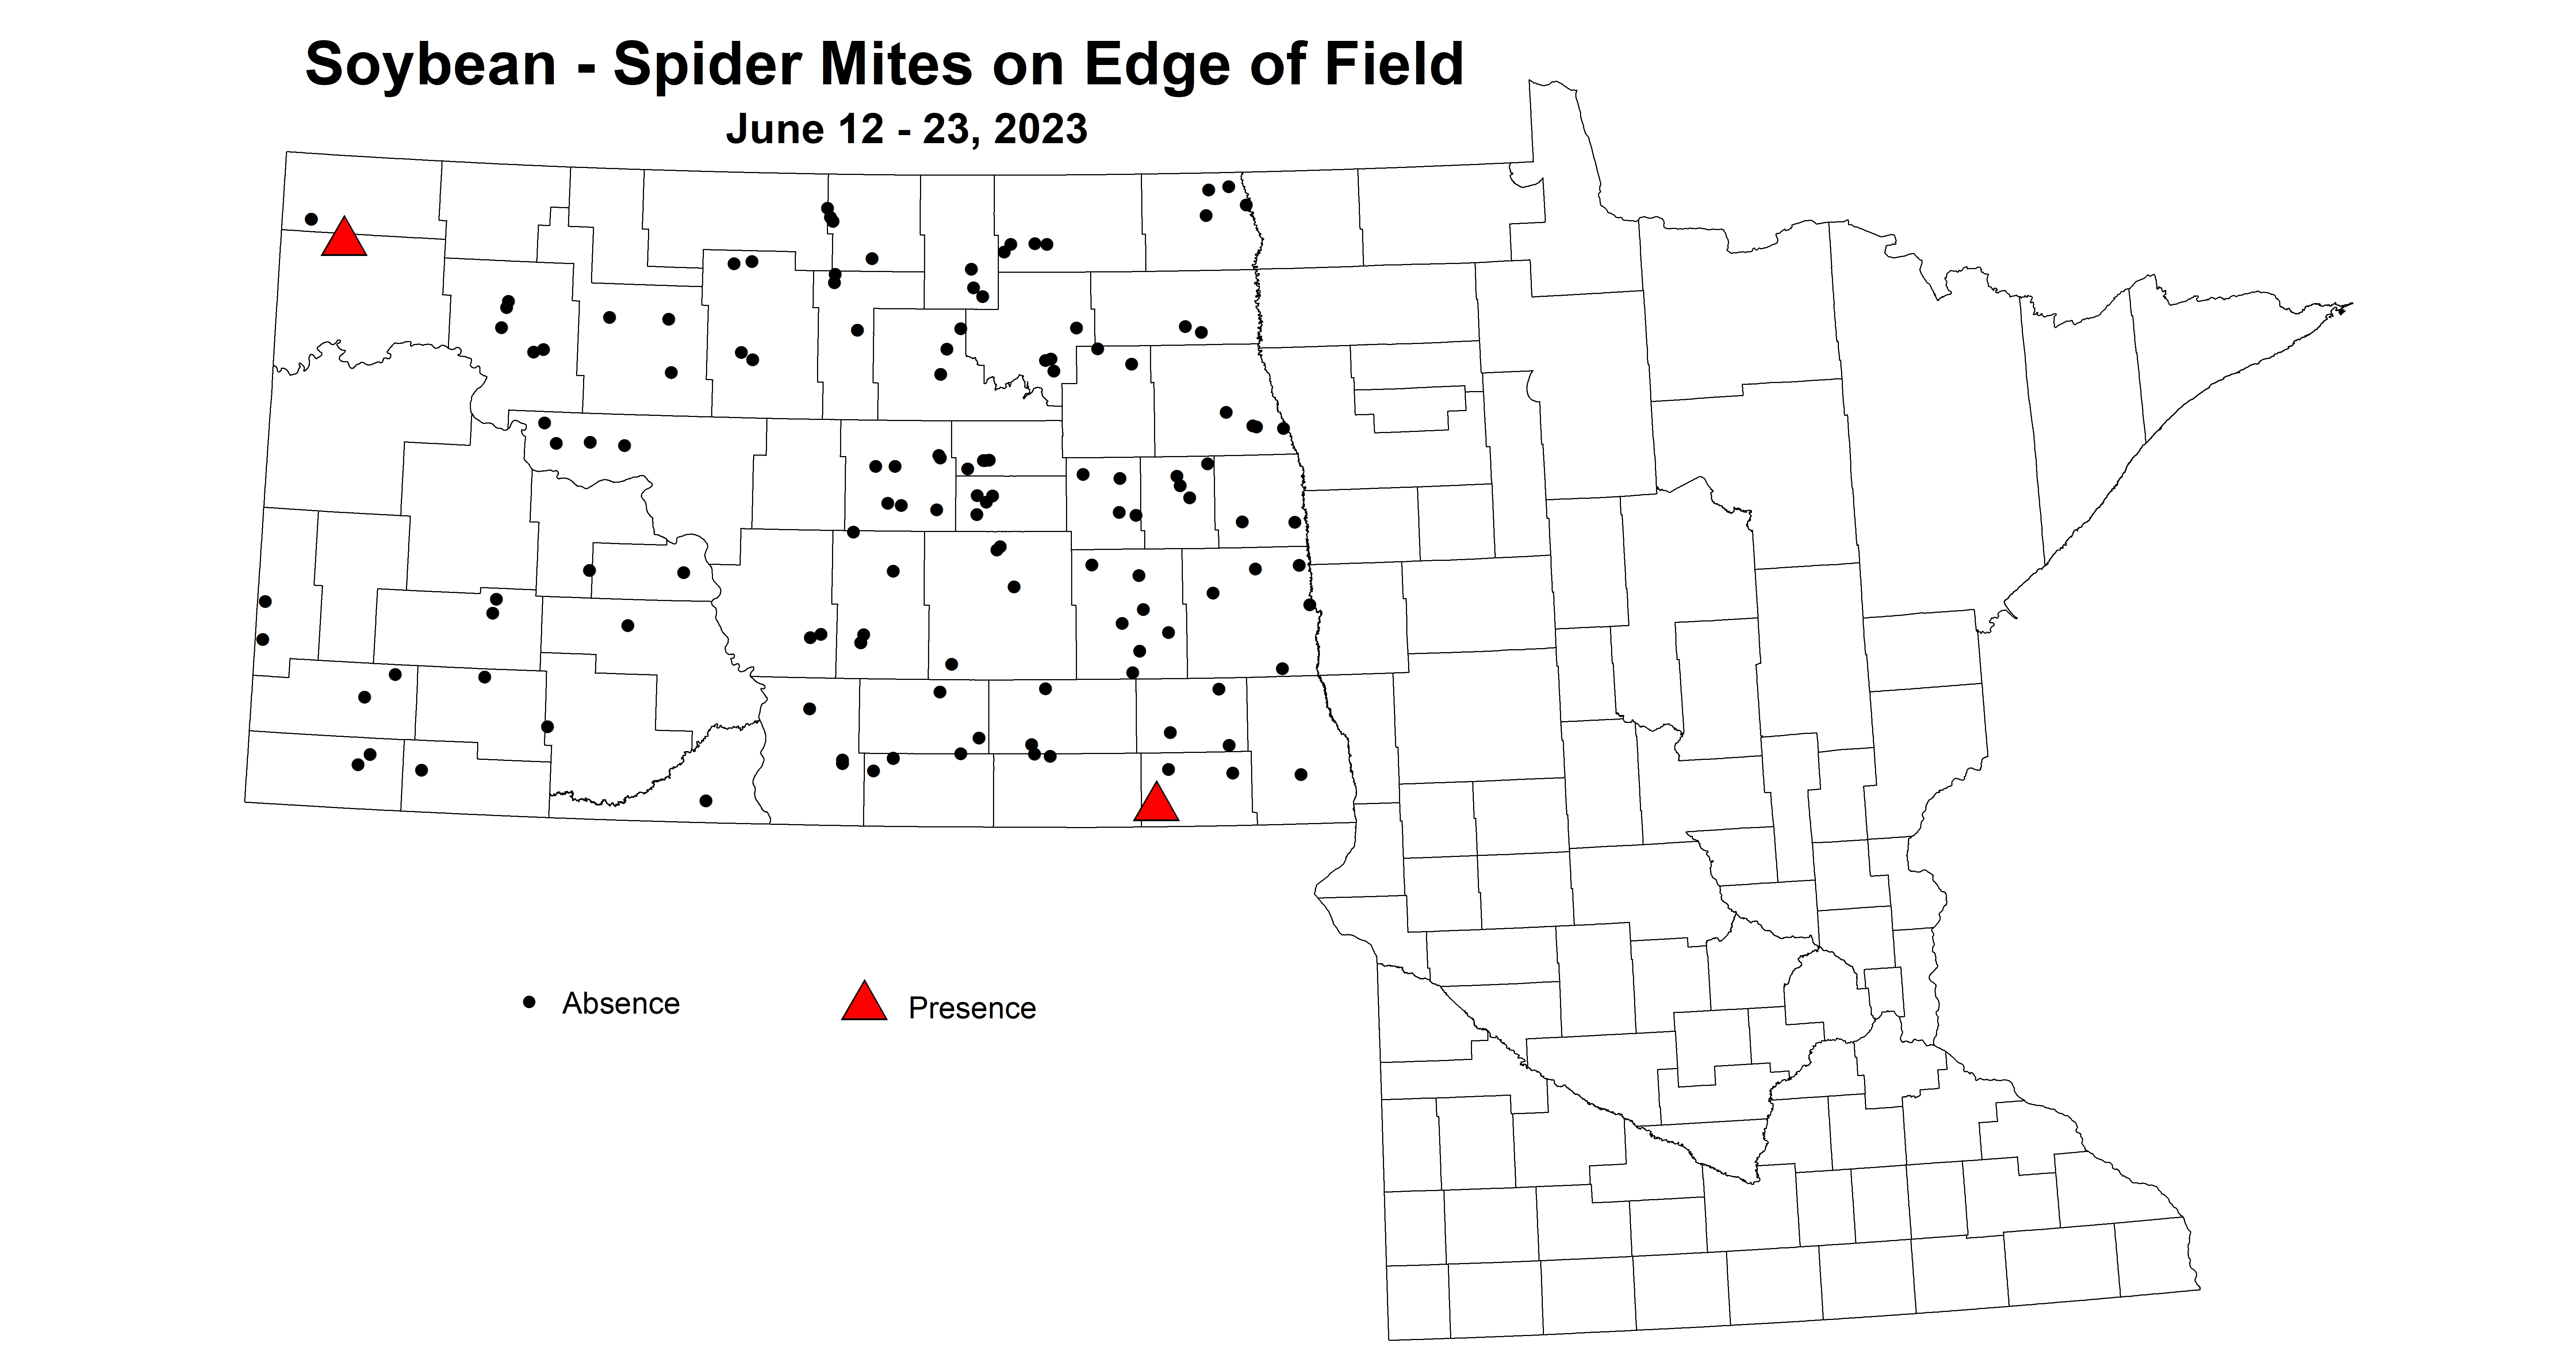 soybean spider mites on edge of field June 12-23 2023